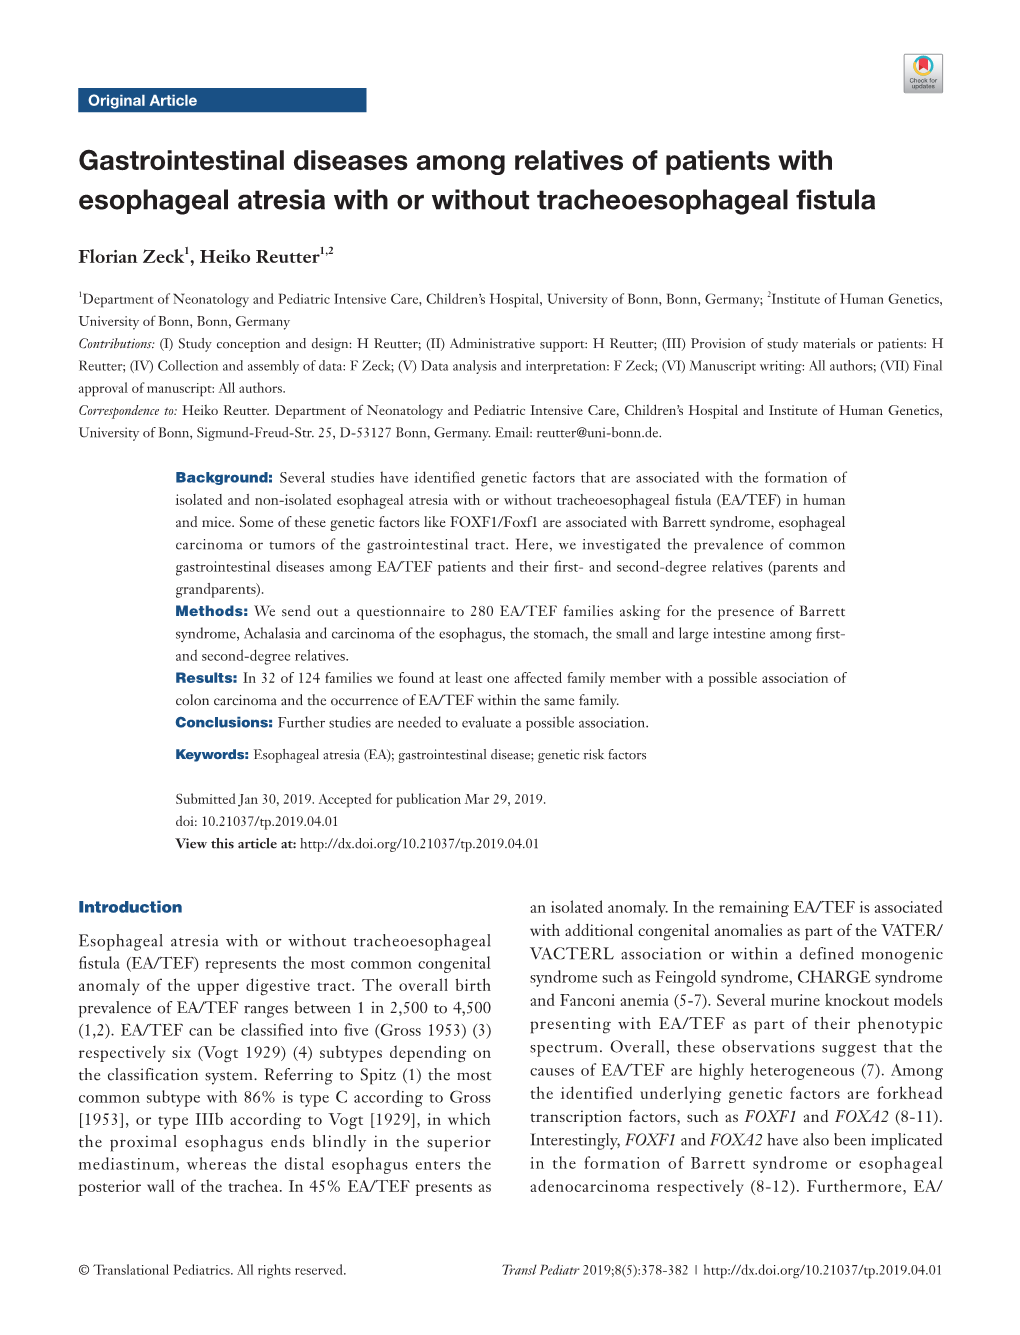 Gastrointestinal Diseases Among Relatives of Patients with Esophageal Atresia with Or Without Tracheoesophageal Fistula